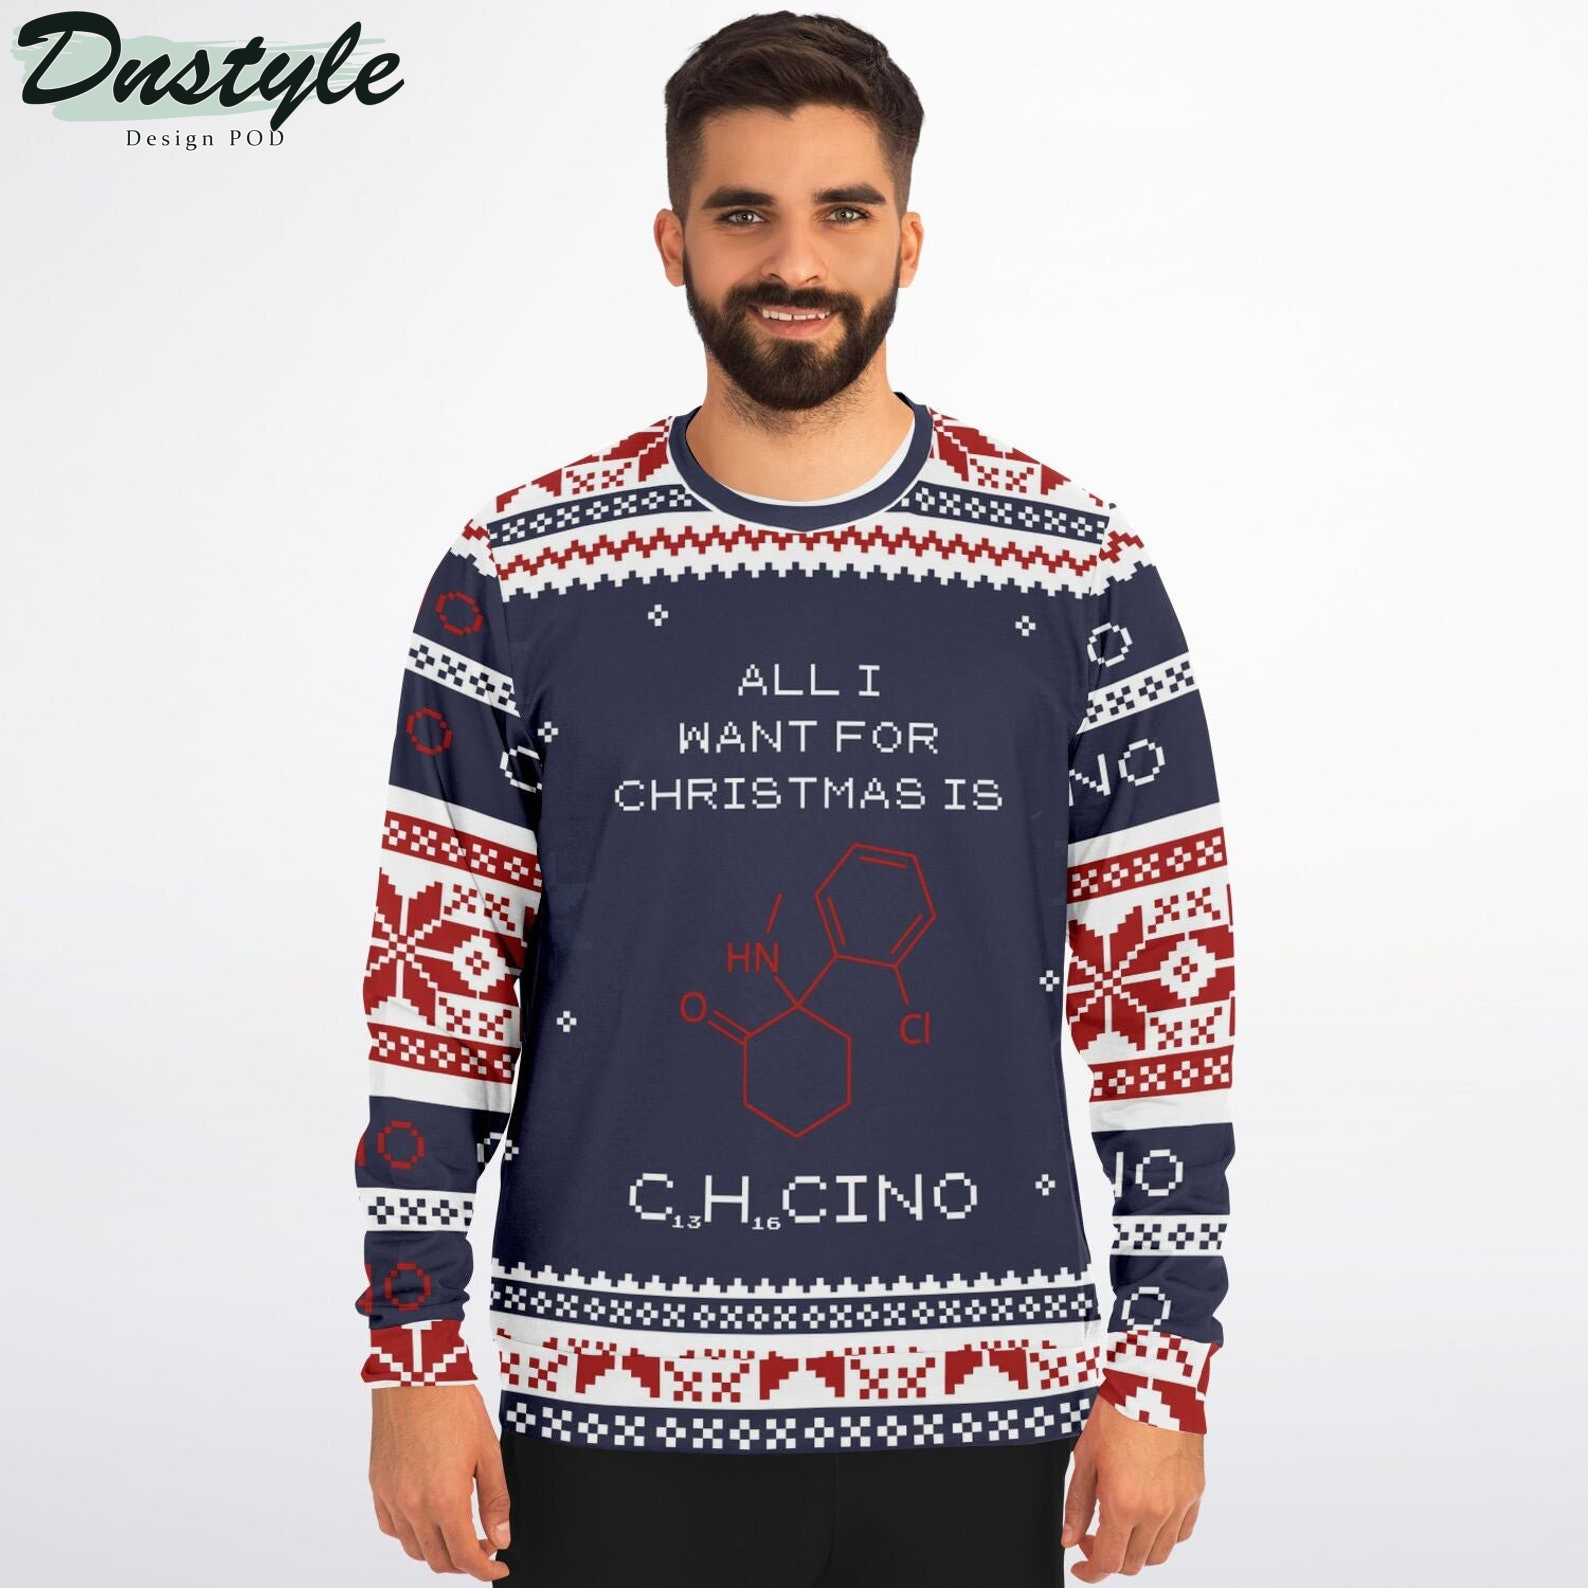 All I Want For Christmas C13H16ClNO 2022 Ugly Sweater